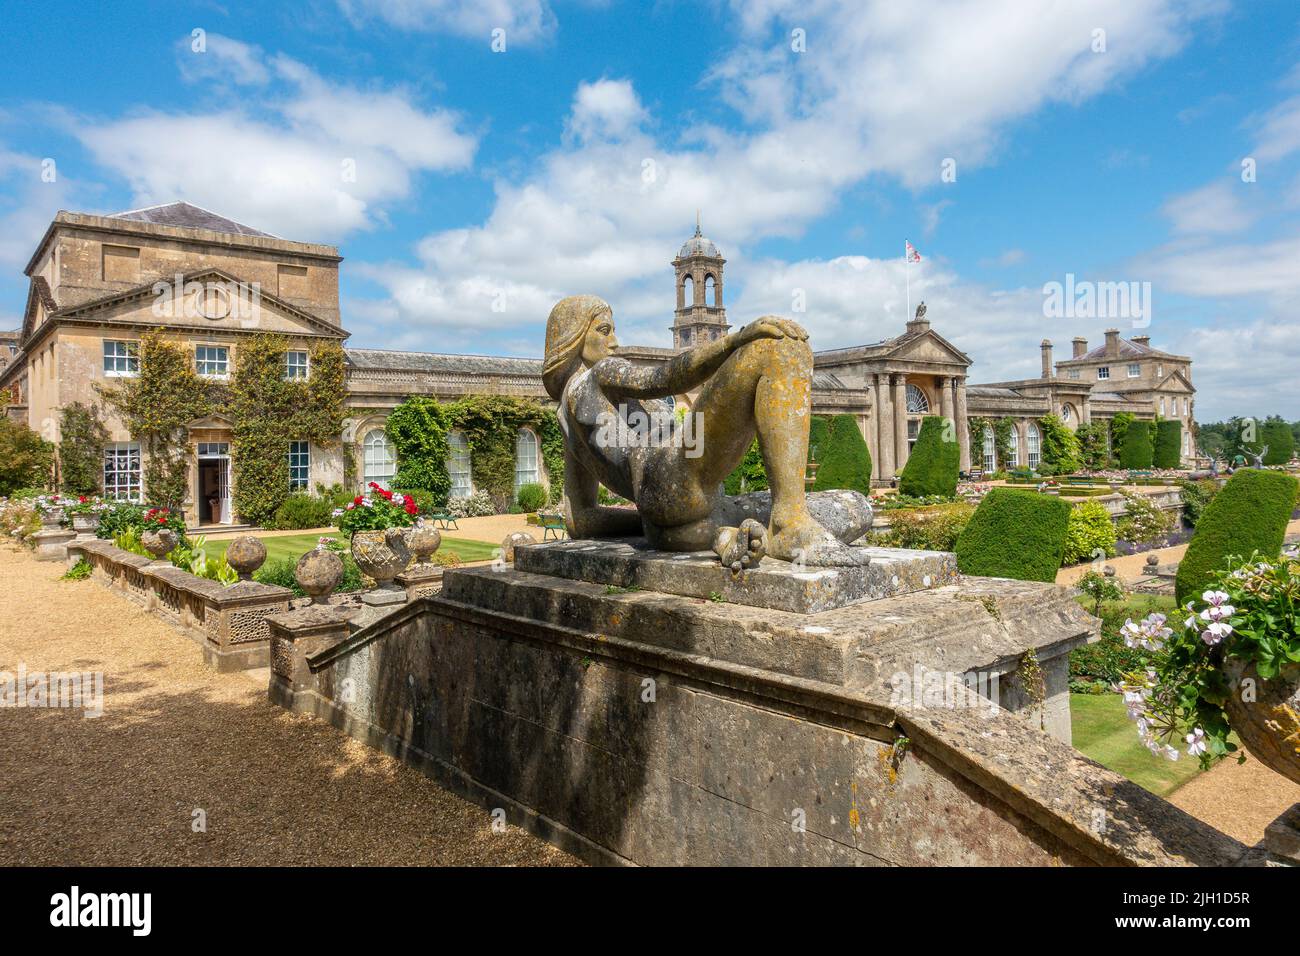 Bowood House,inclinable nu Female,Sculpture,formal.Gardens,Fountain,Wiltshire,Royaume-Uni Banque D'Images